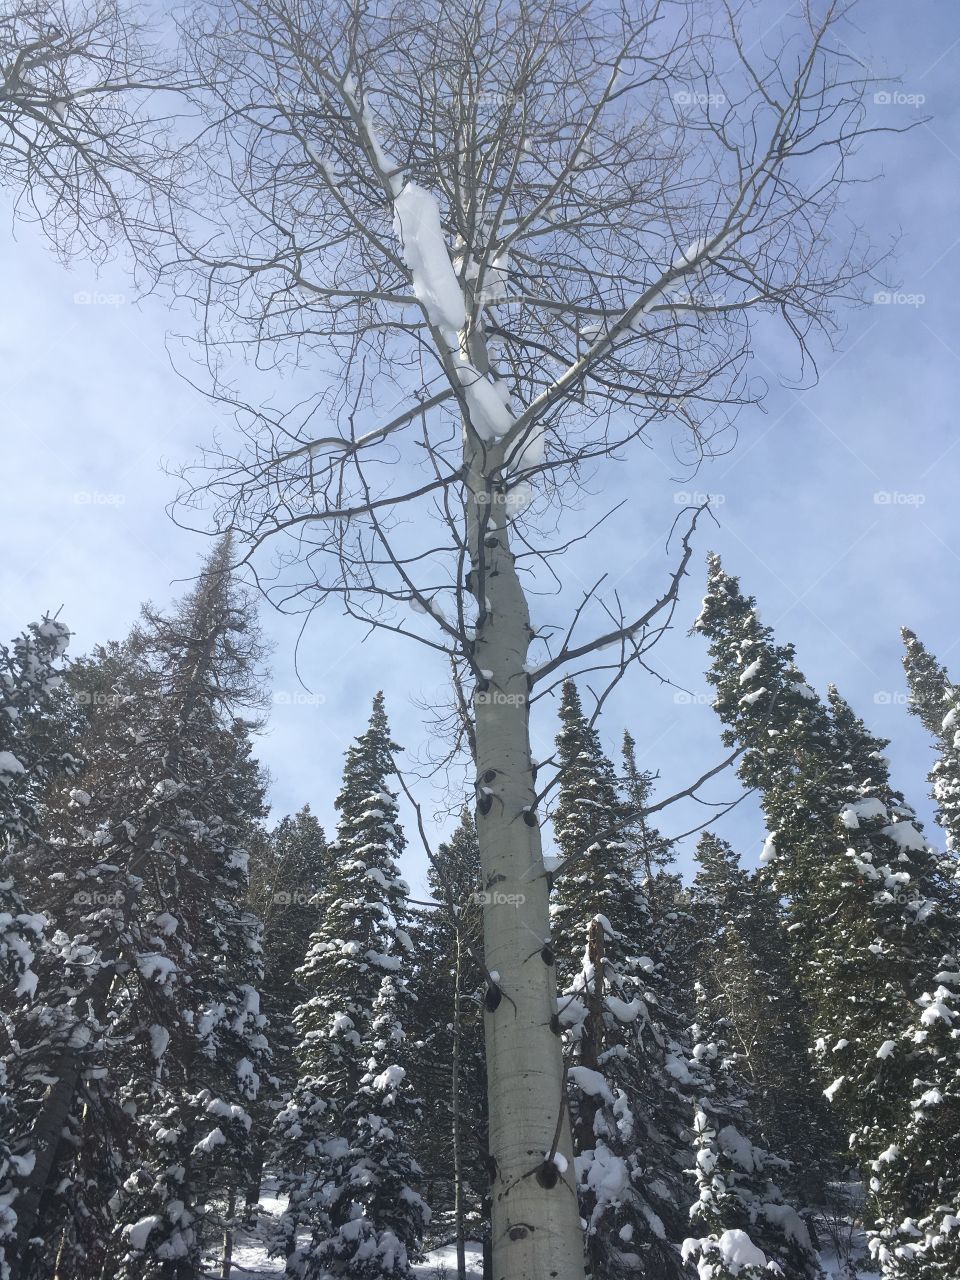 Aspen and pines